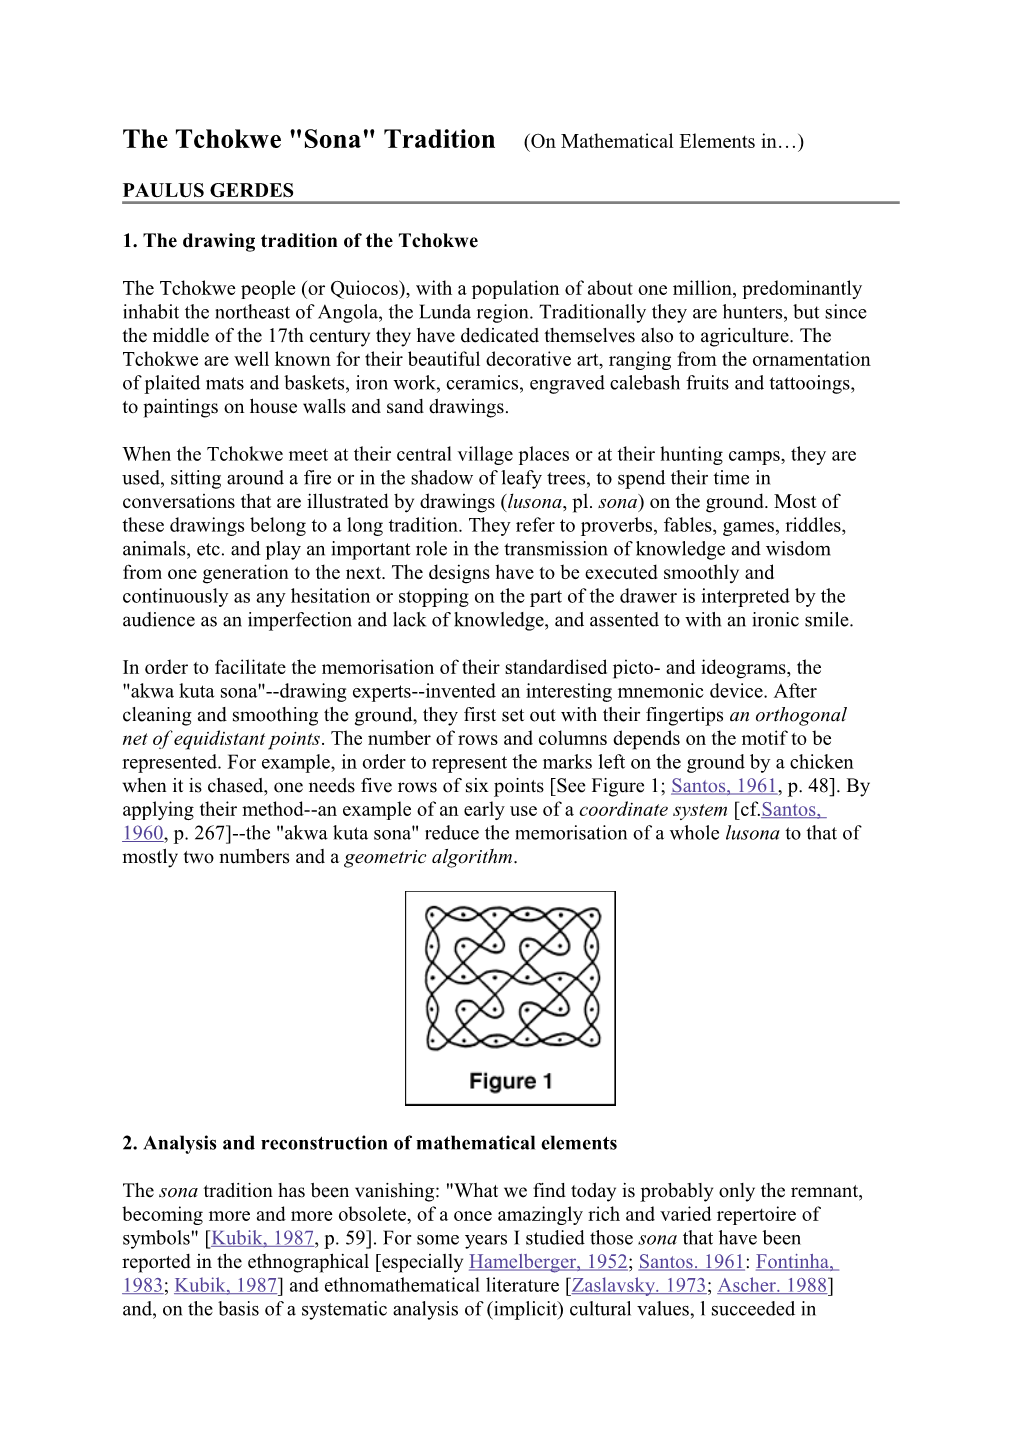 The Tchokwe Sona Tradition (On Mathematical Elements in )